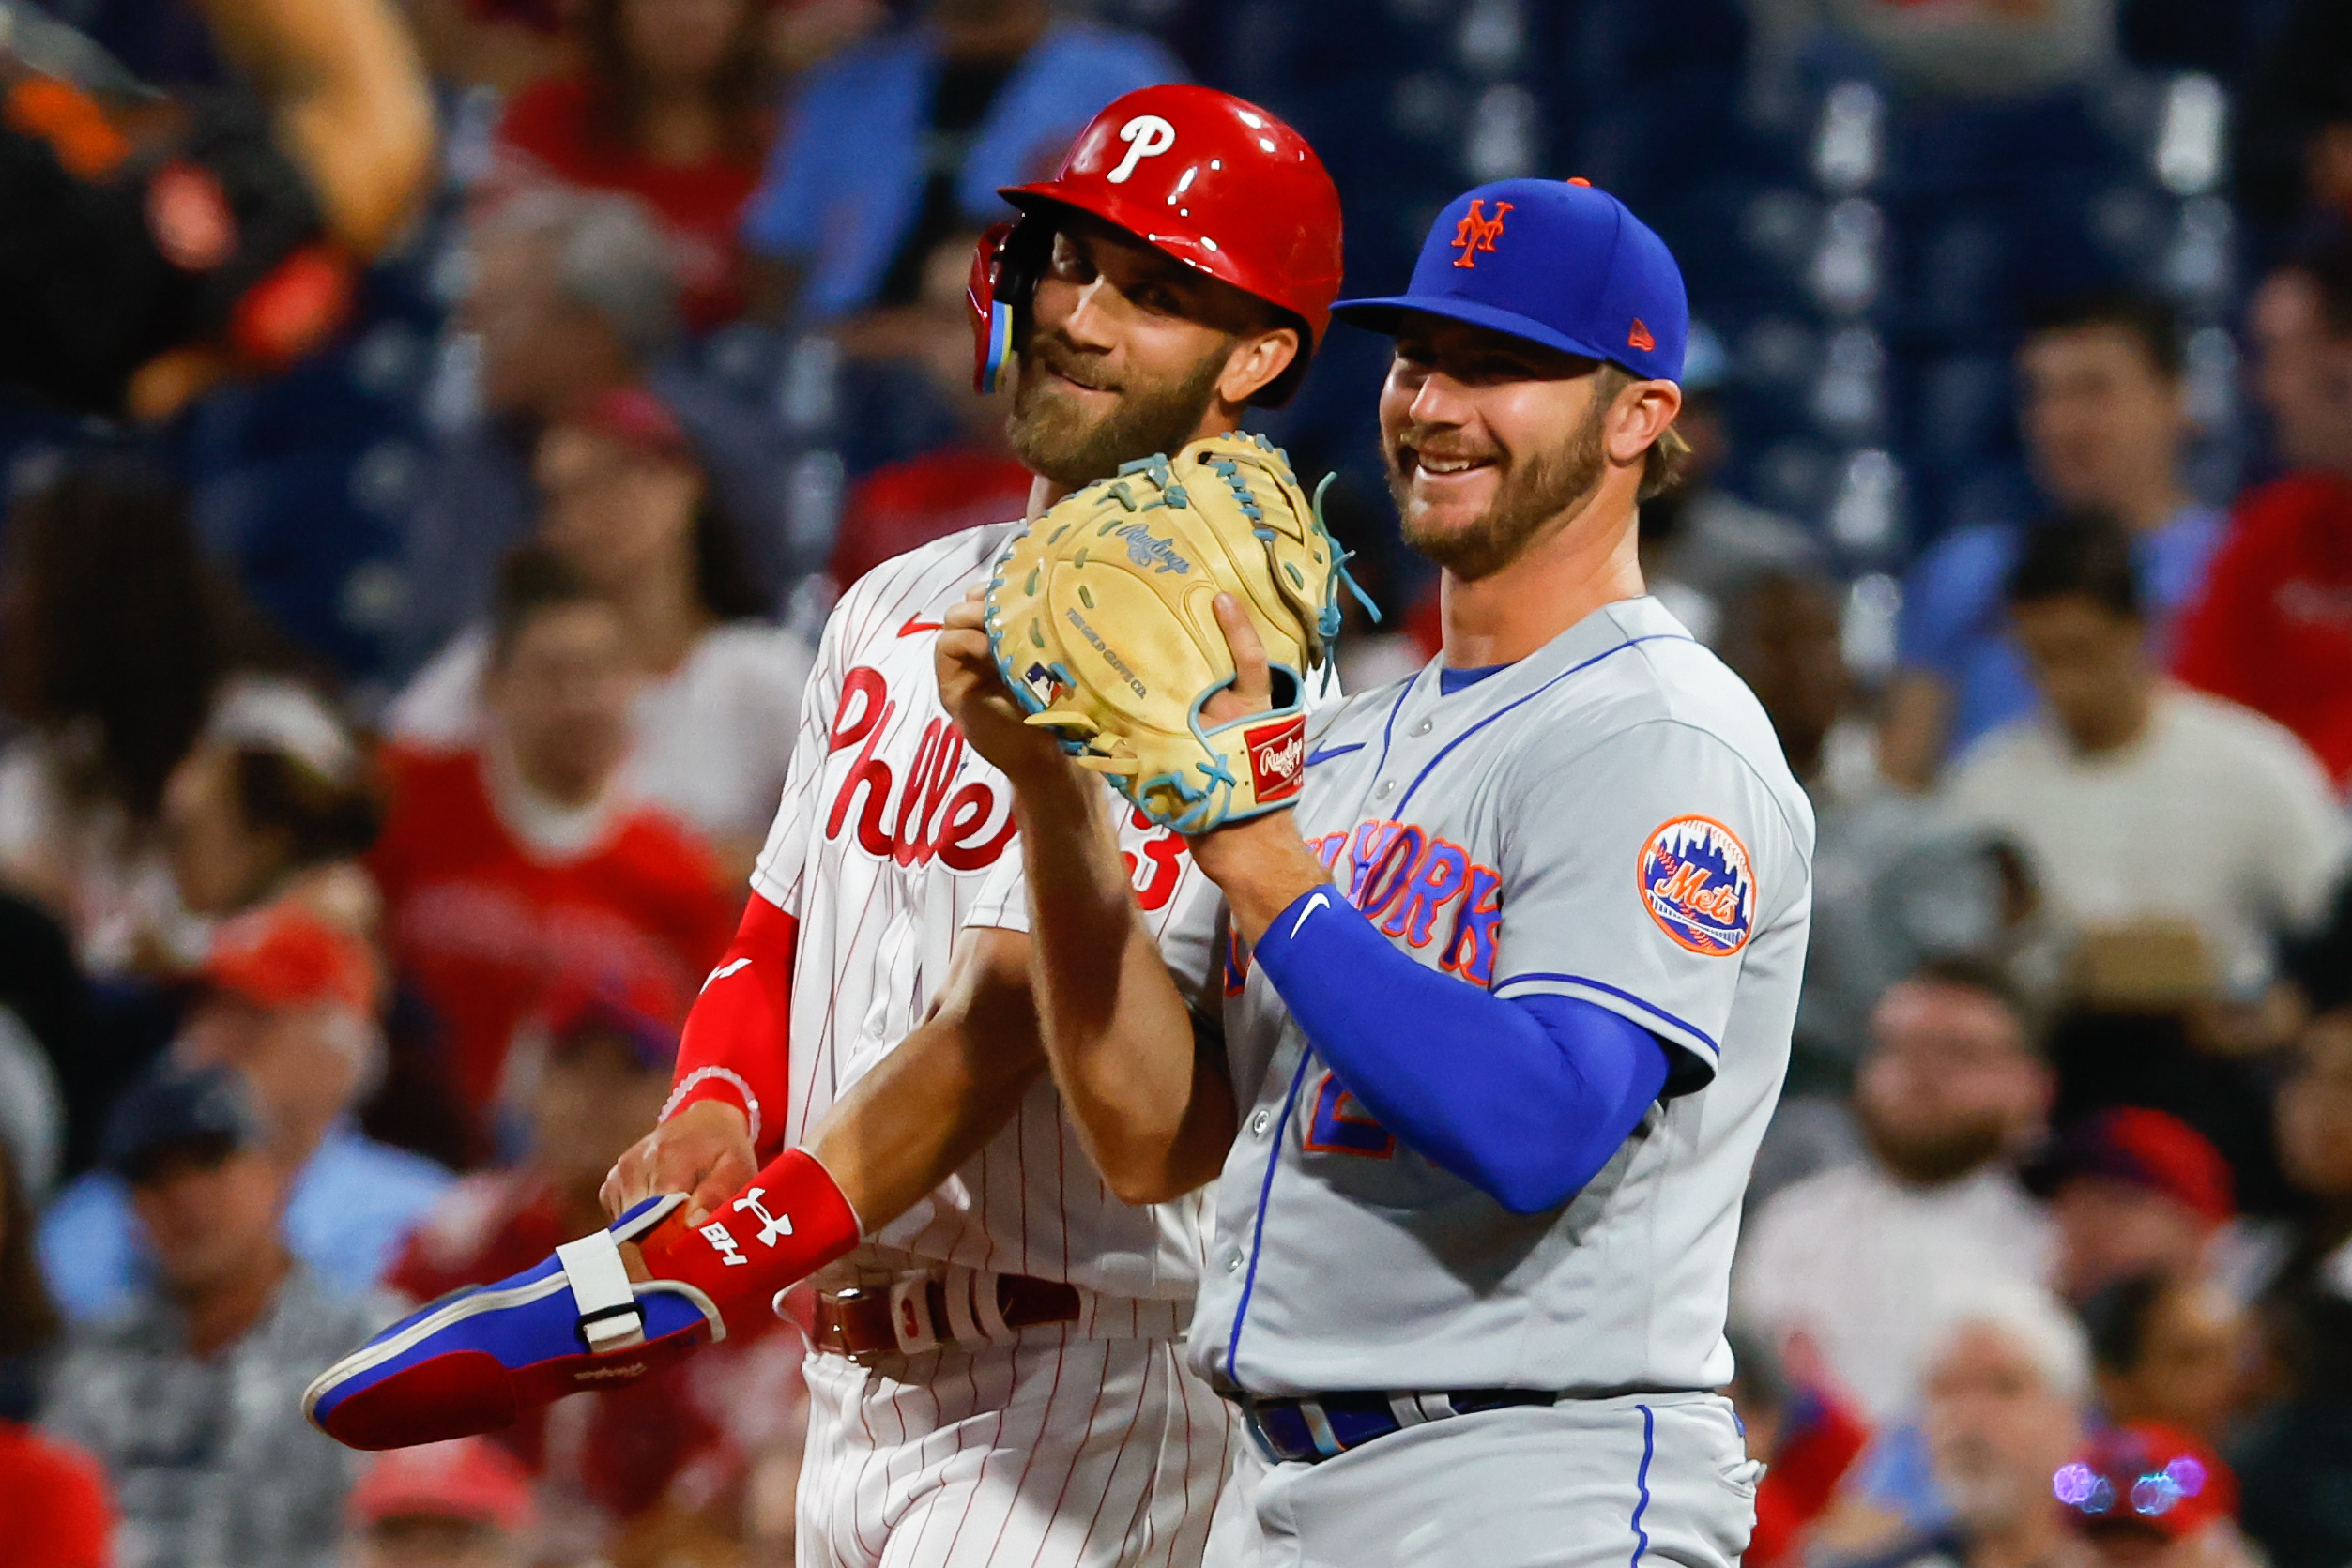 Photos of the Phillies falling to the Mets